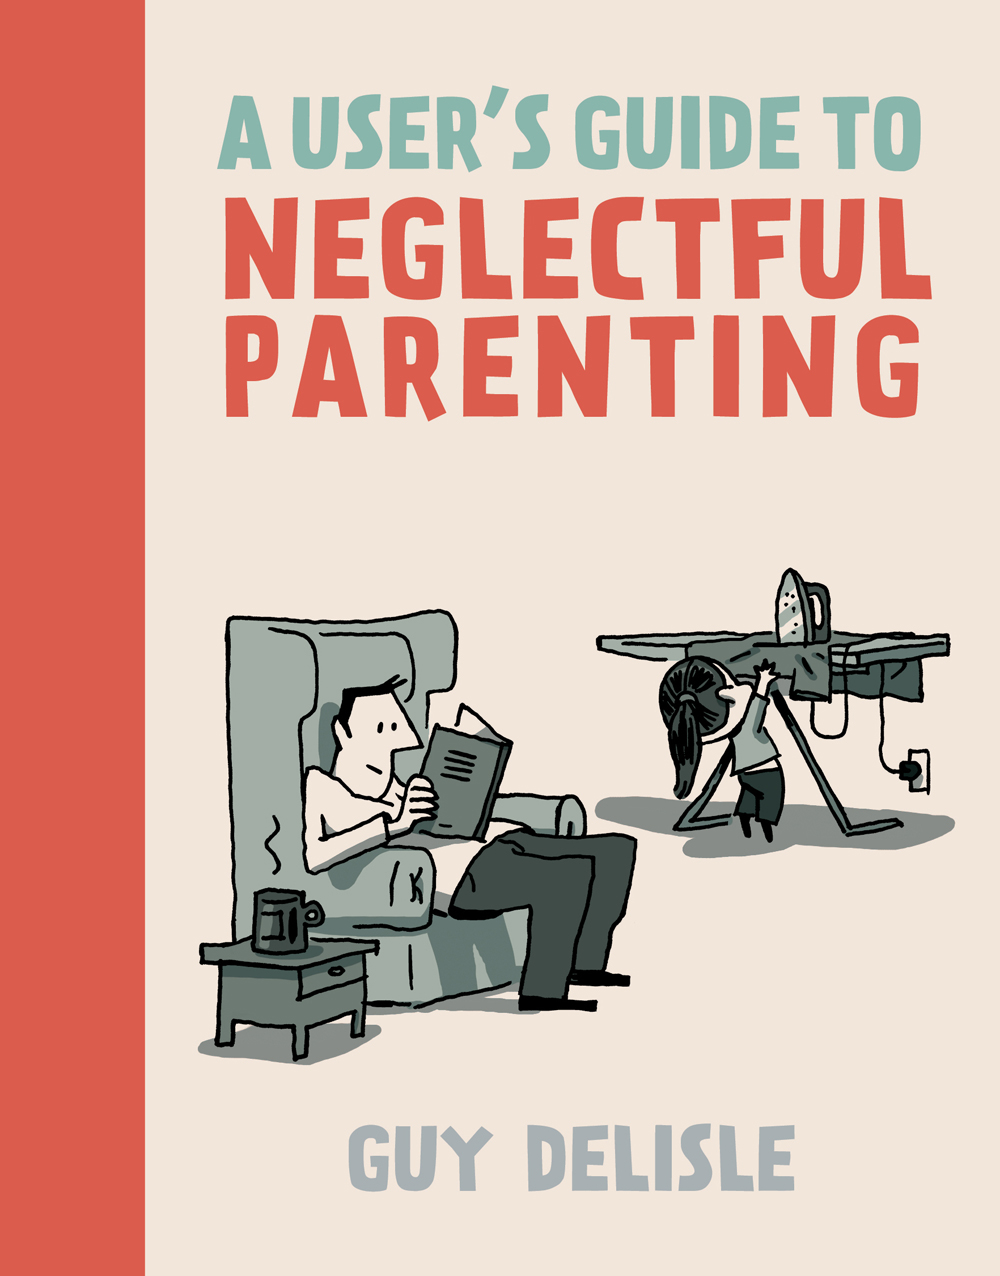 Users Guide To Neglectful Parenting Graphic Novel New Printing